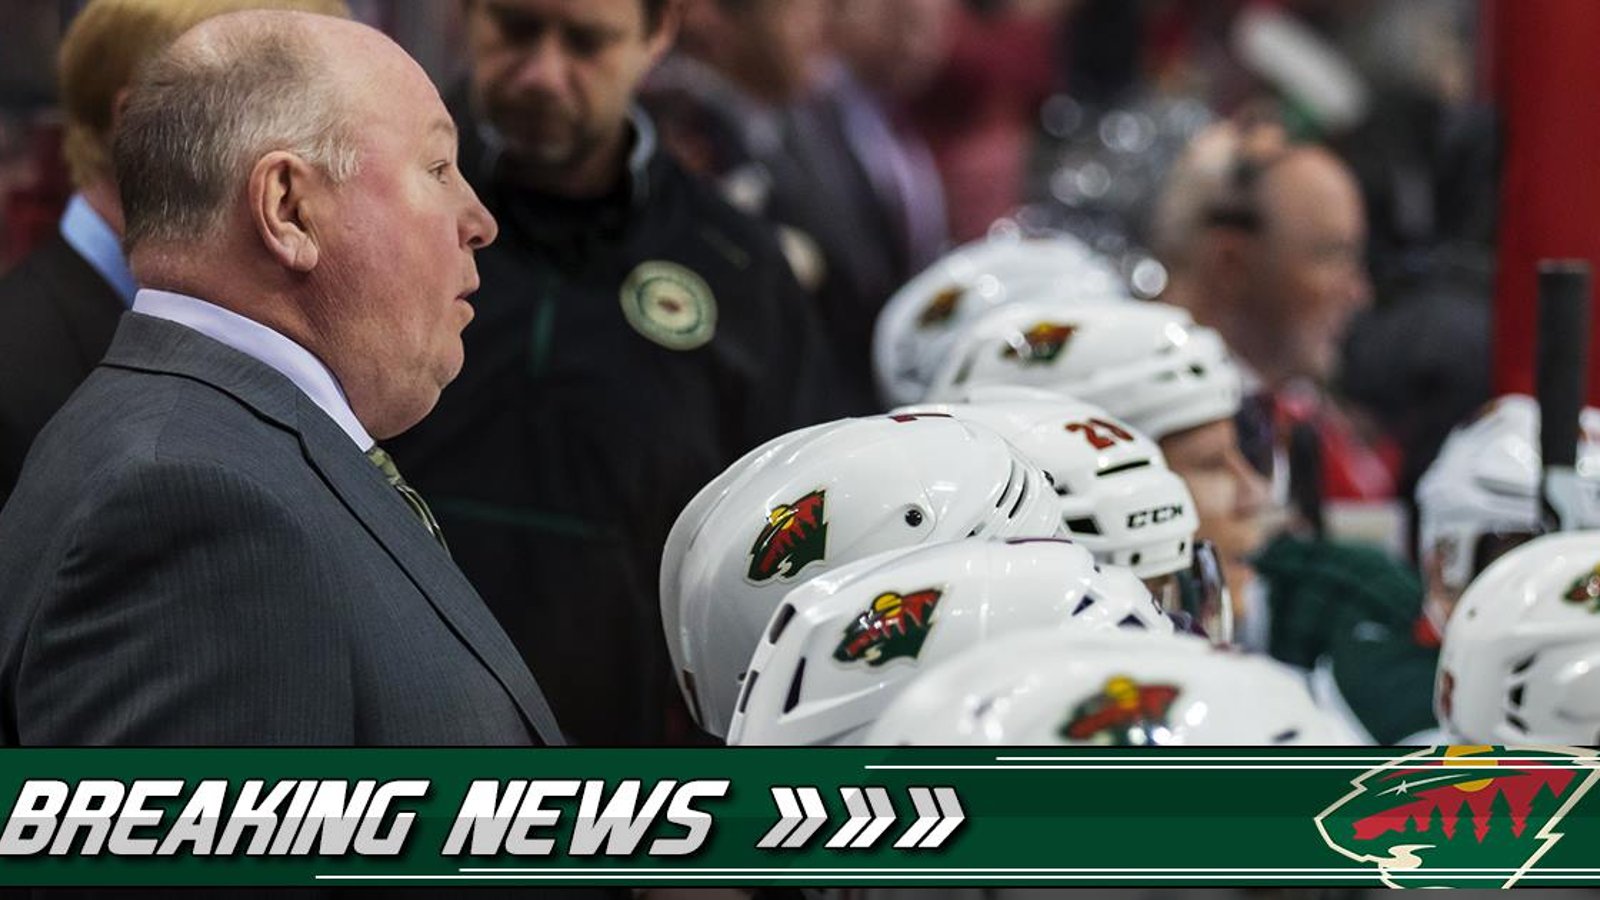 Bruce Boudreau scratches Donato for the first time to make controversial addition to the lineup.